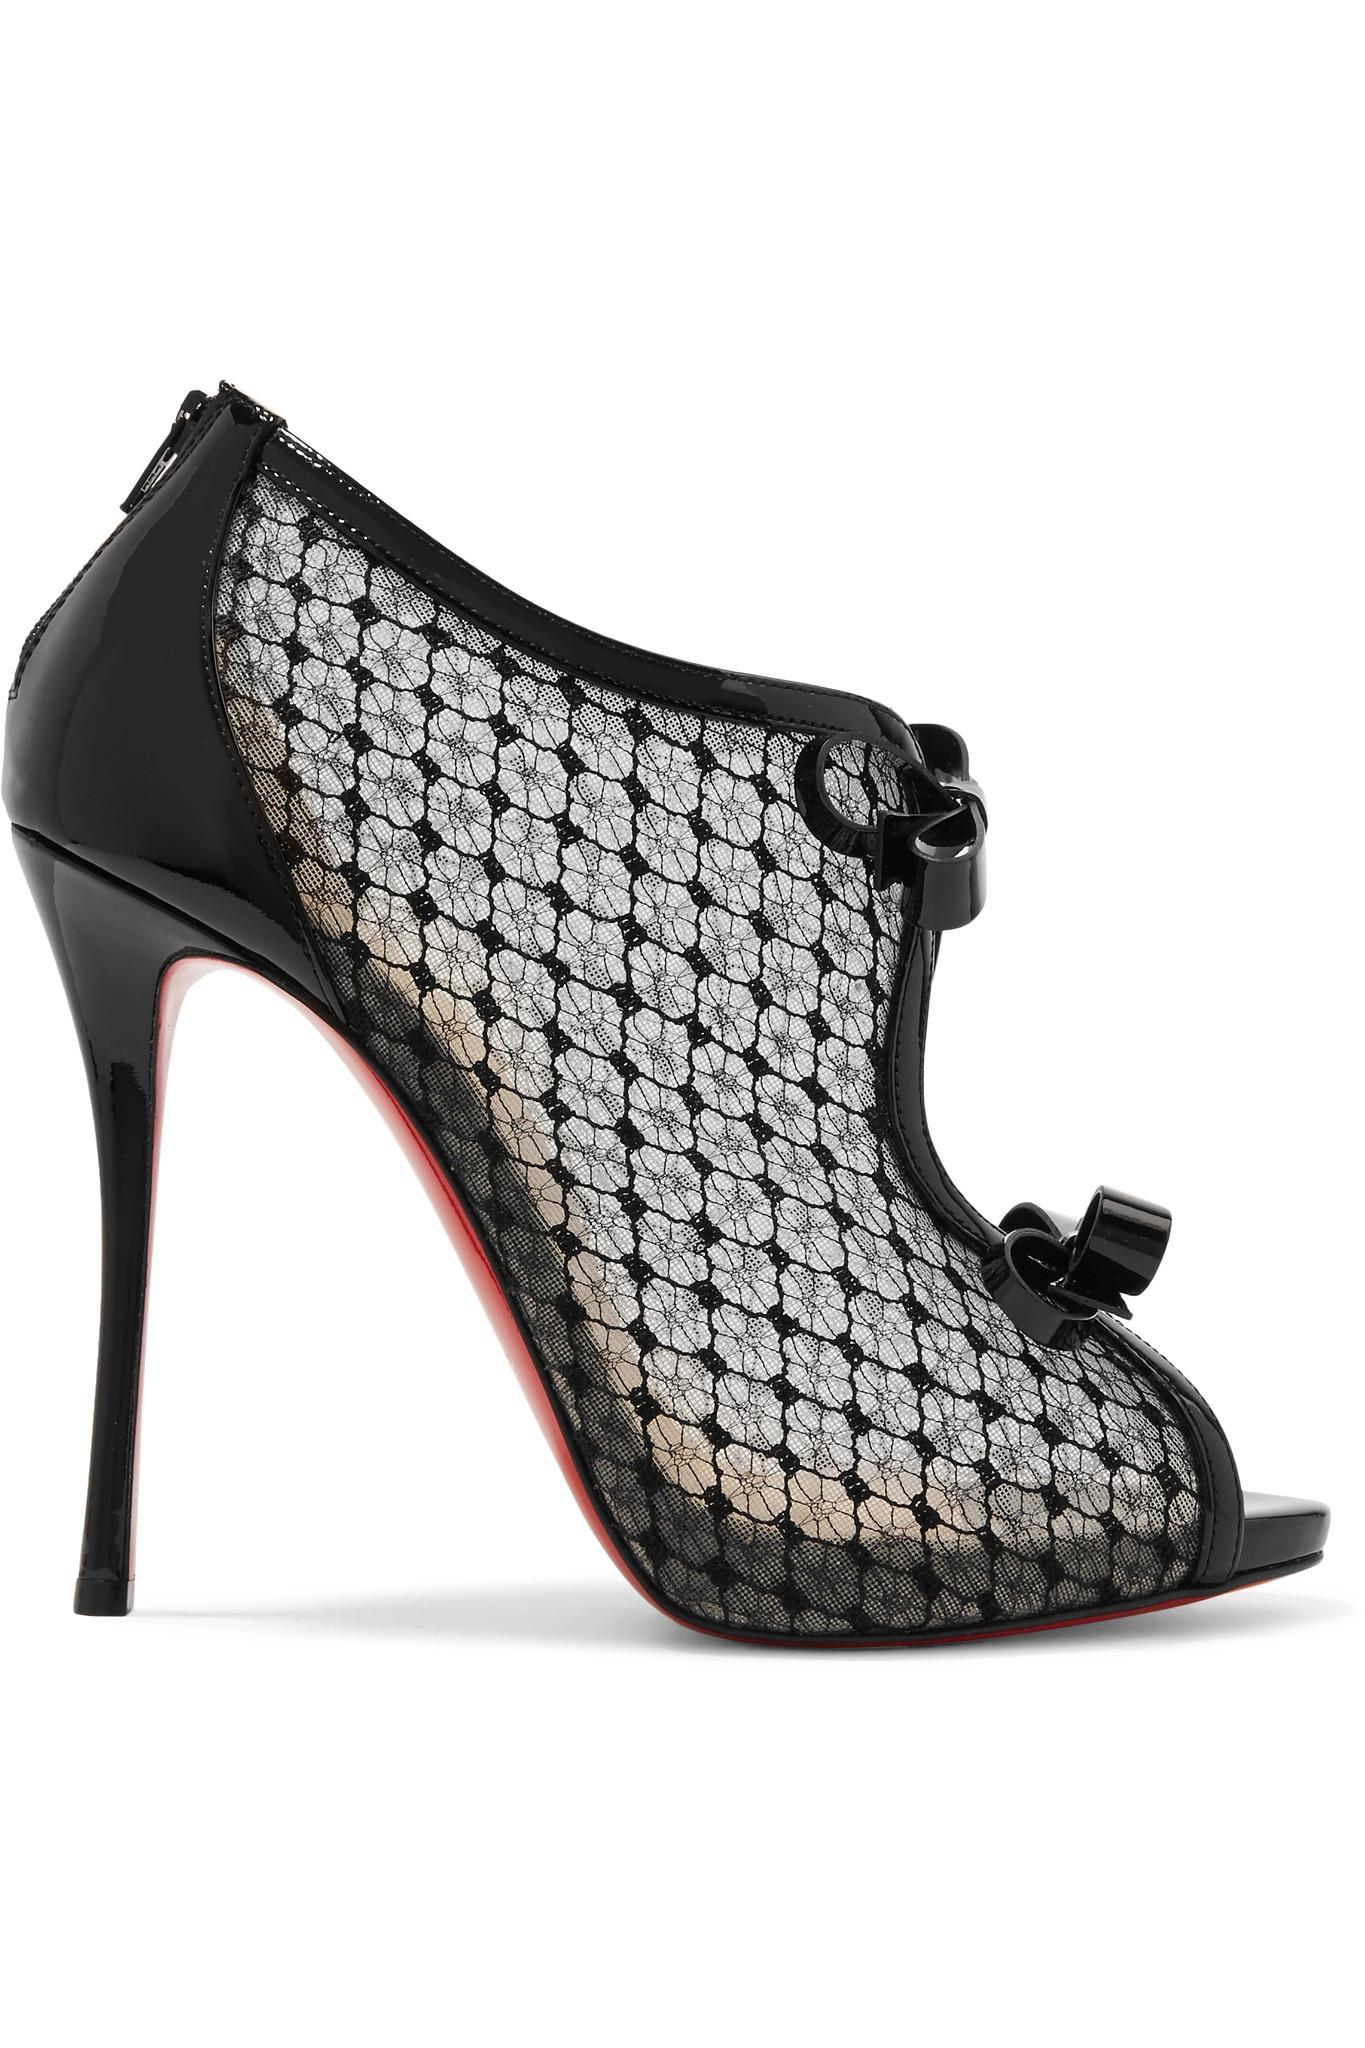 Christian louboutin Empiralta 120 Bow-embellished Embroidered Mesh Sandals in Black | Lyst